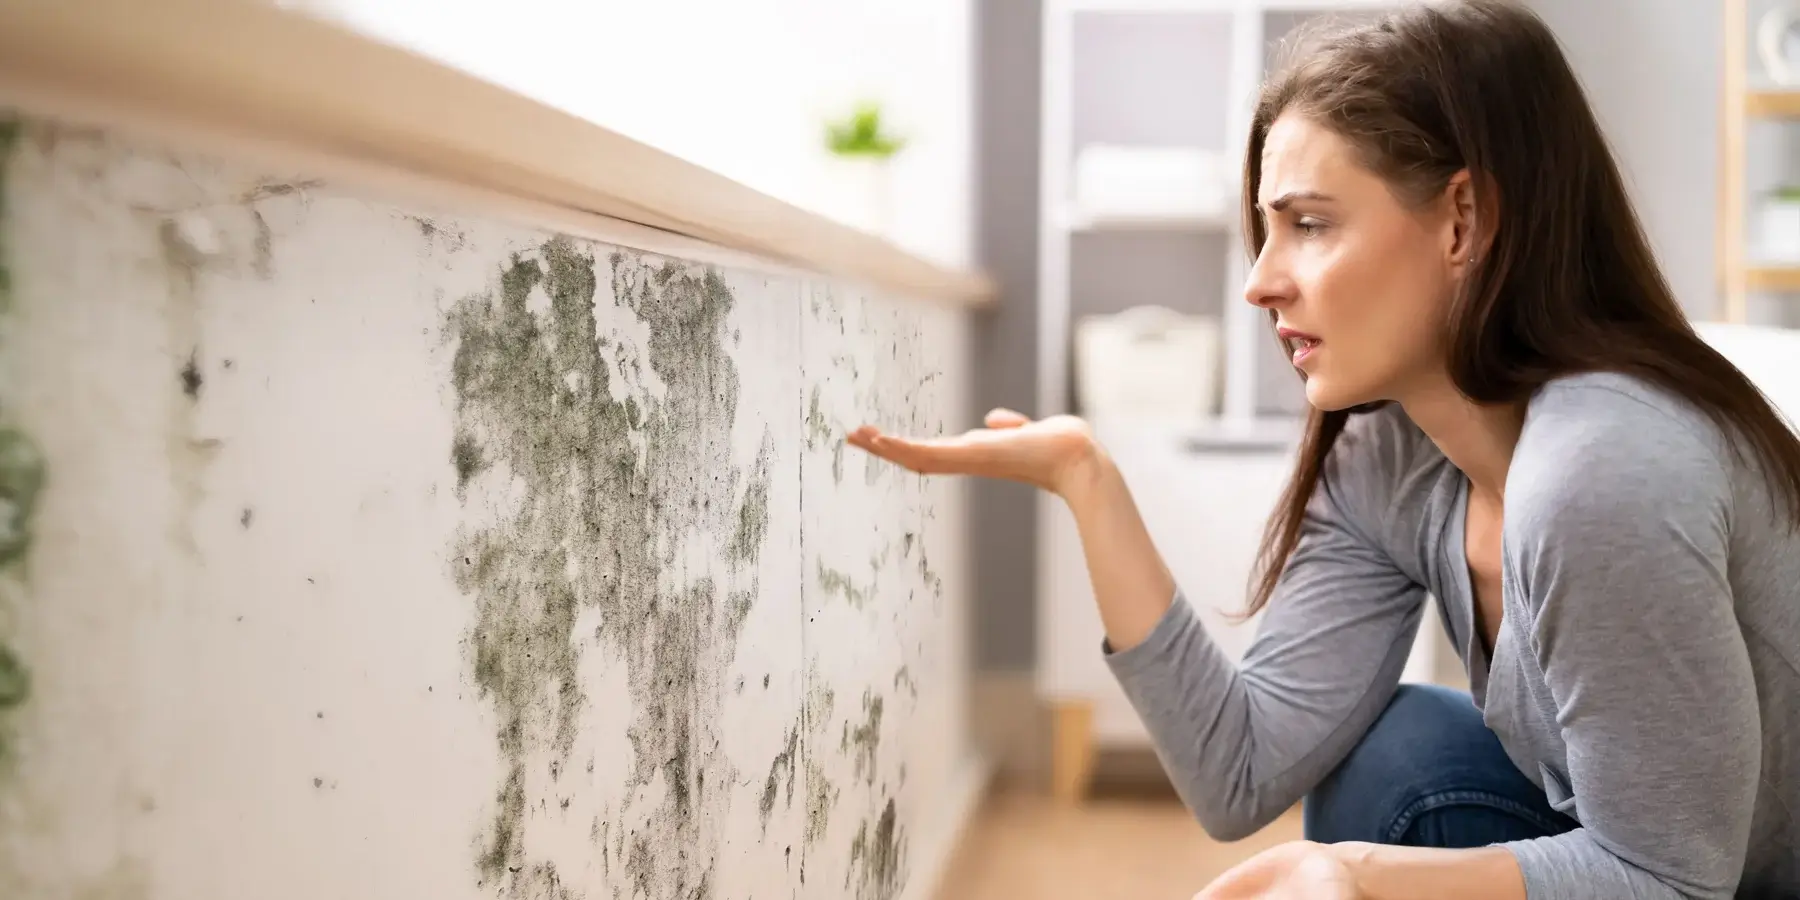 How Long Does It Take for Mold to Affect Your Health?